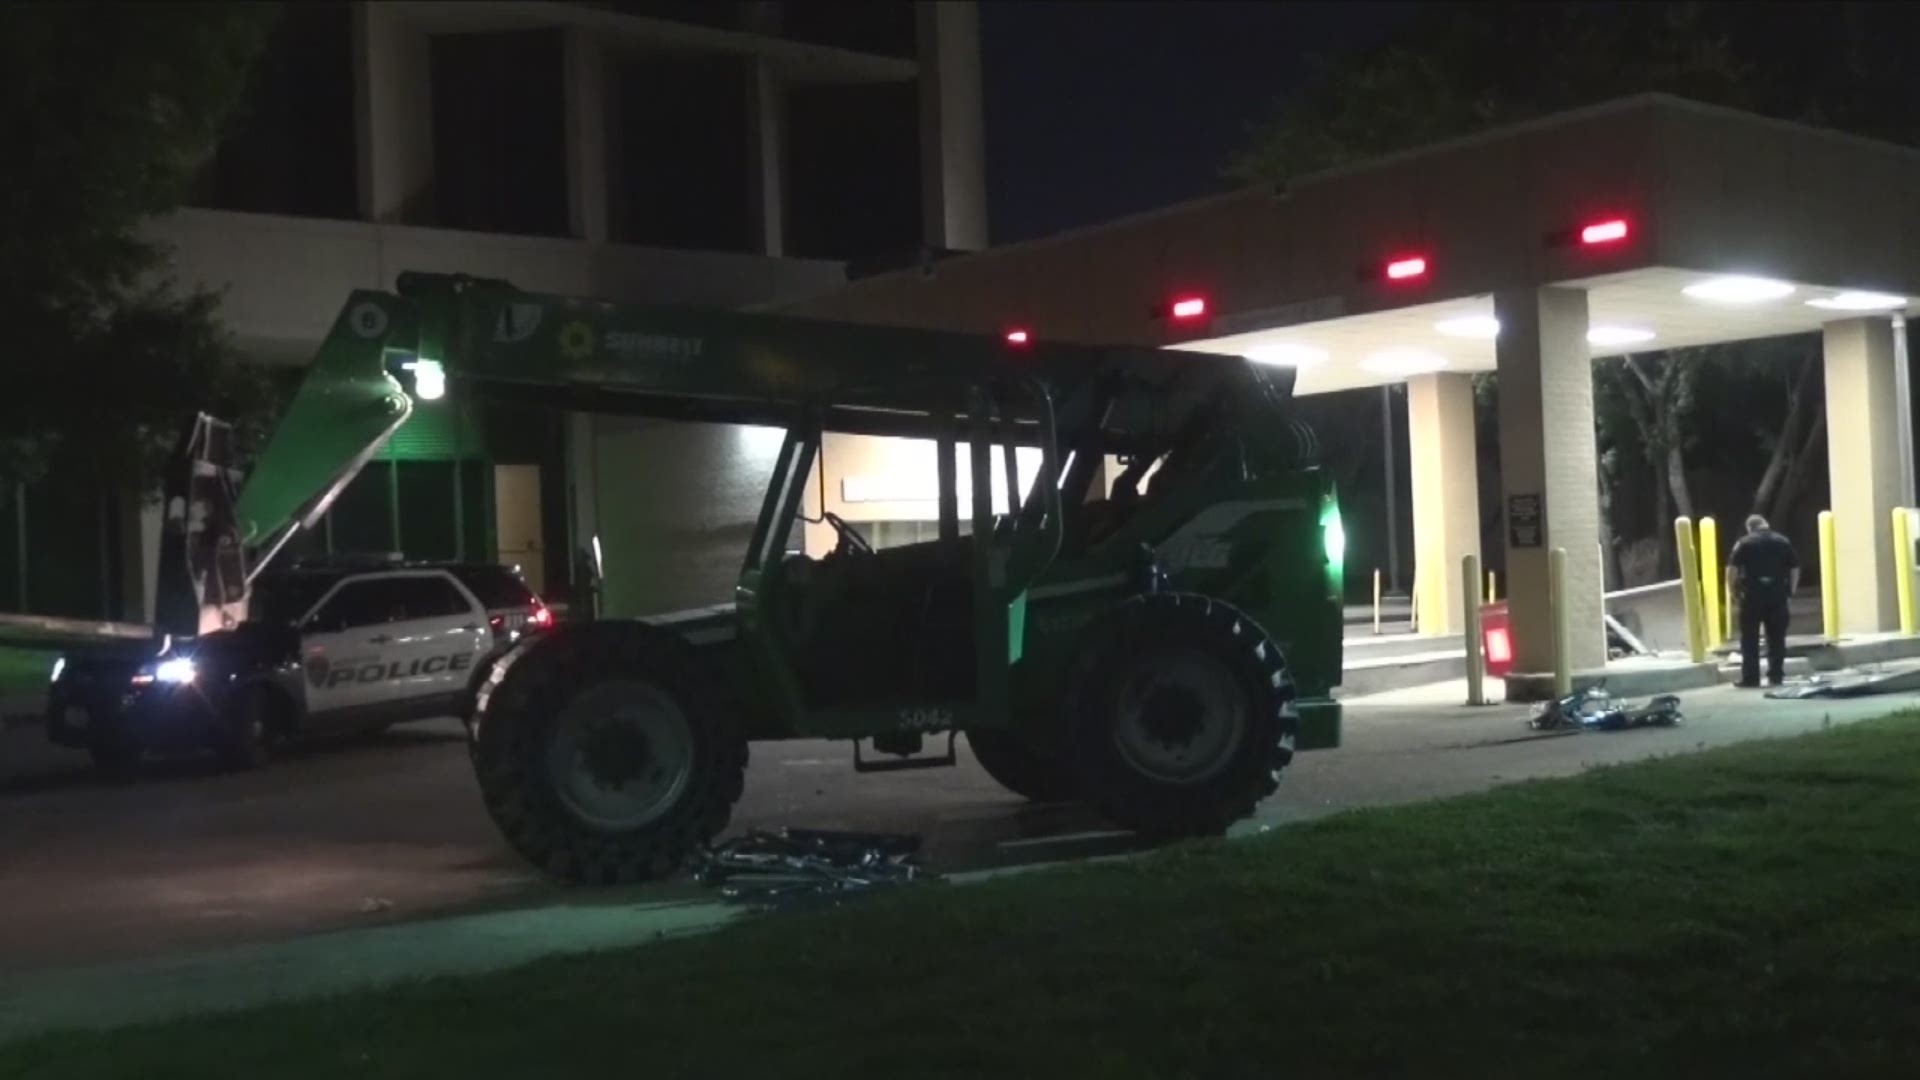 Police are searching for a pair of suspects who they say used a forklift to smash an ATM and steal the cashbox inside early Wednesday.